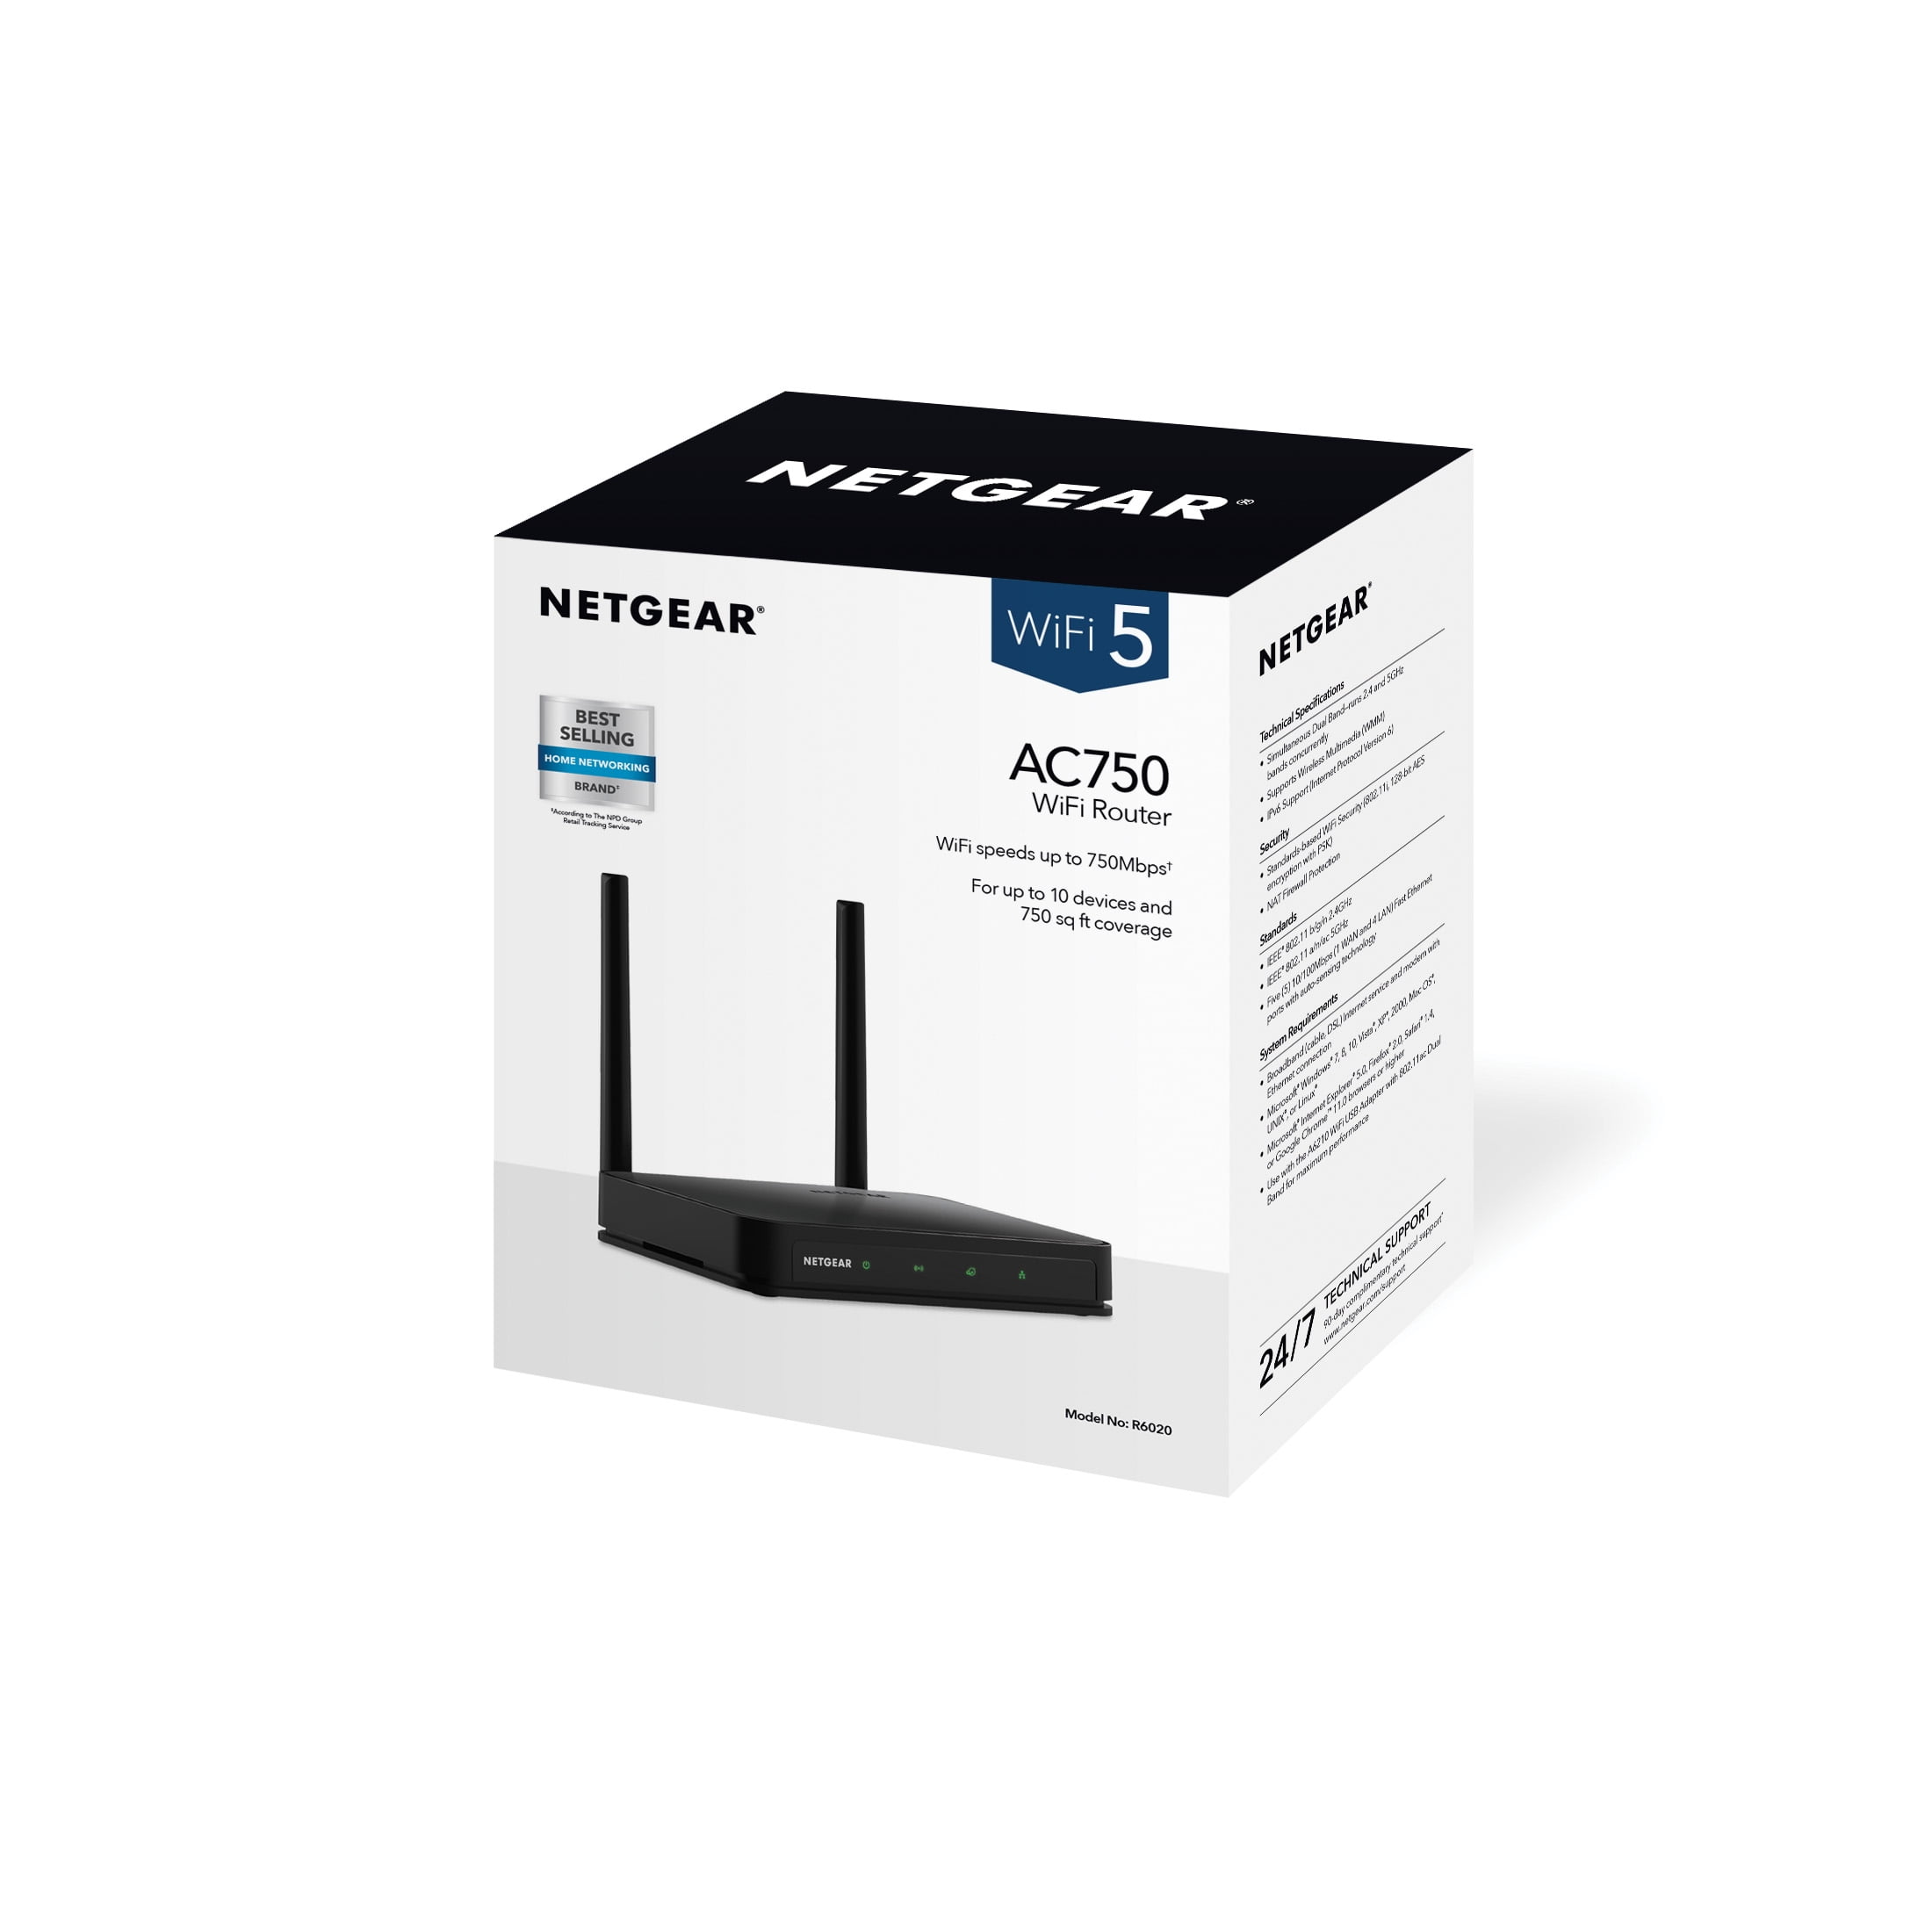 Stereotype Retired Foresee NETGEAR - AC750 WiFi Router, 750Mbps (R6020) - Walmart.com